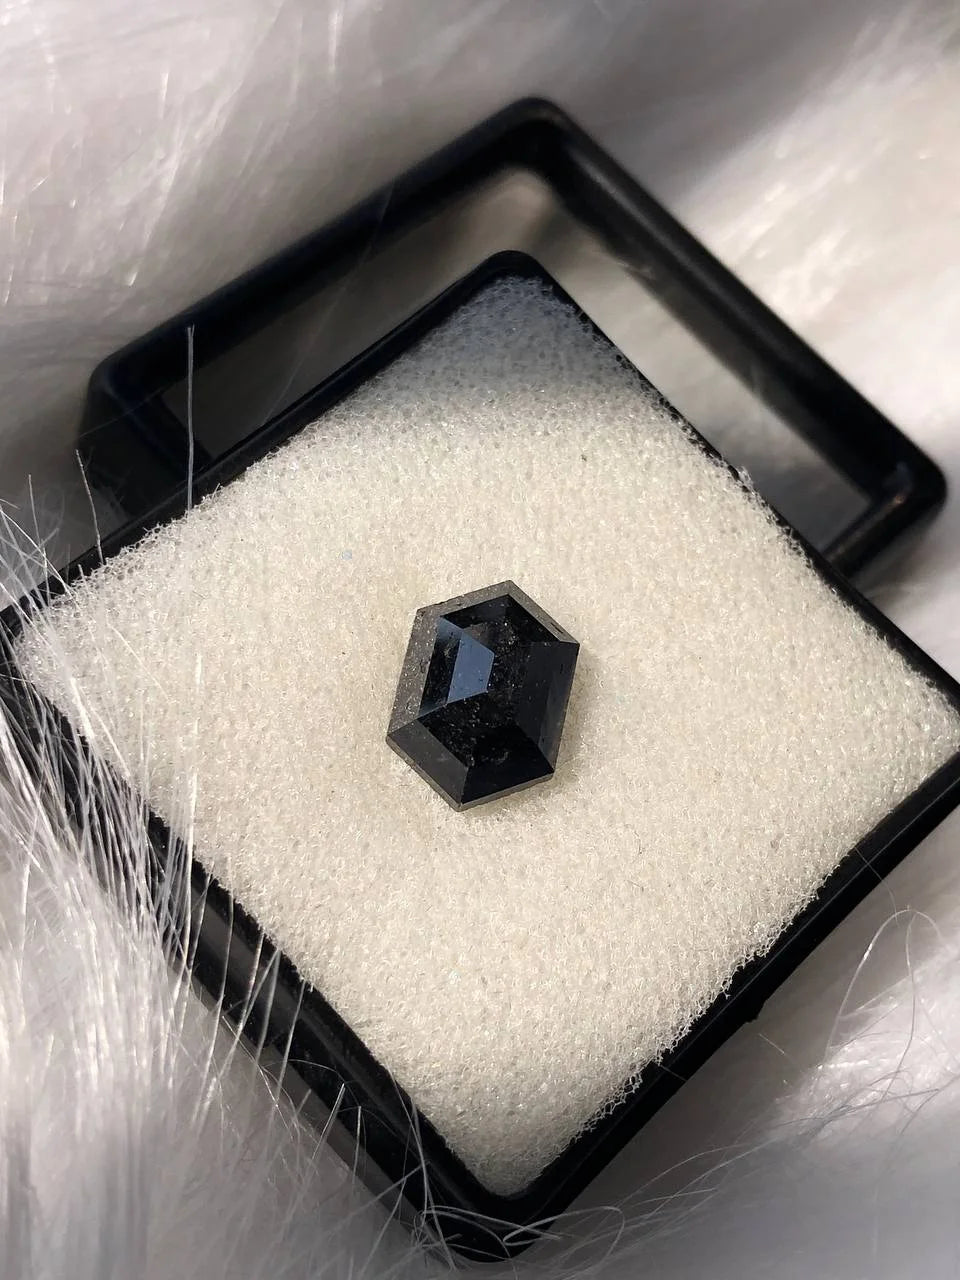 4.39 Ct Natural Black Diamond Fancy Loose Diamond Ideal For Crafting Unique Jewelry Pieces